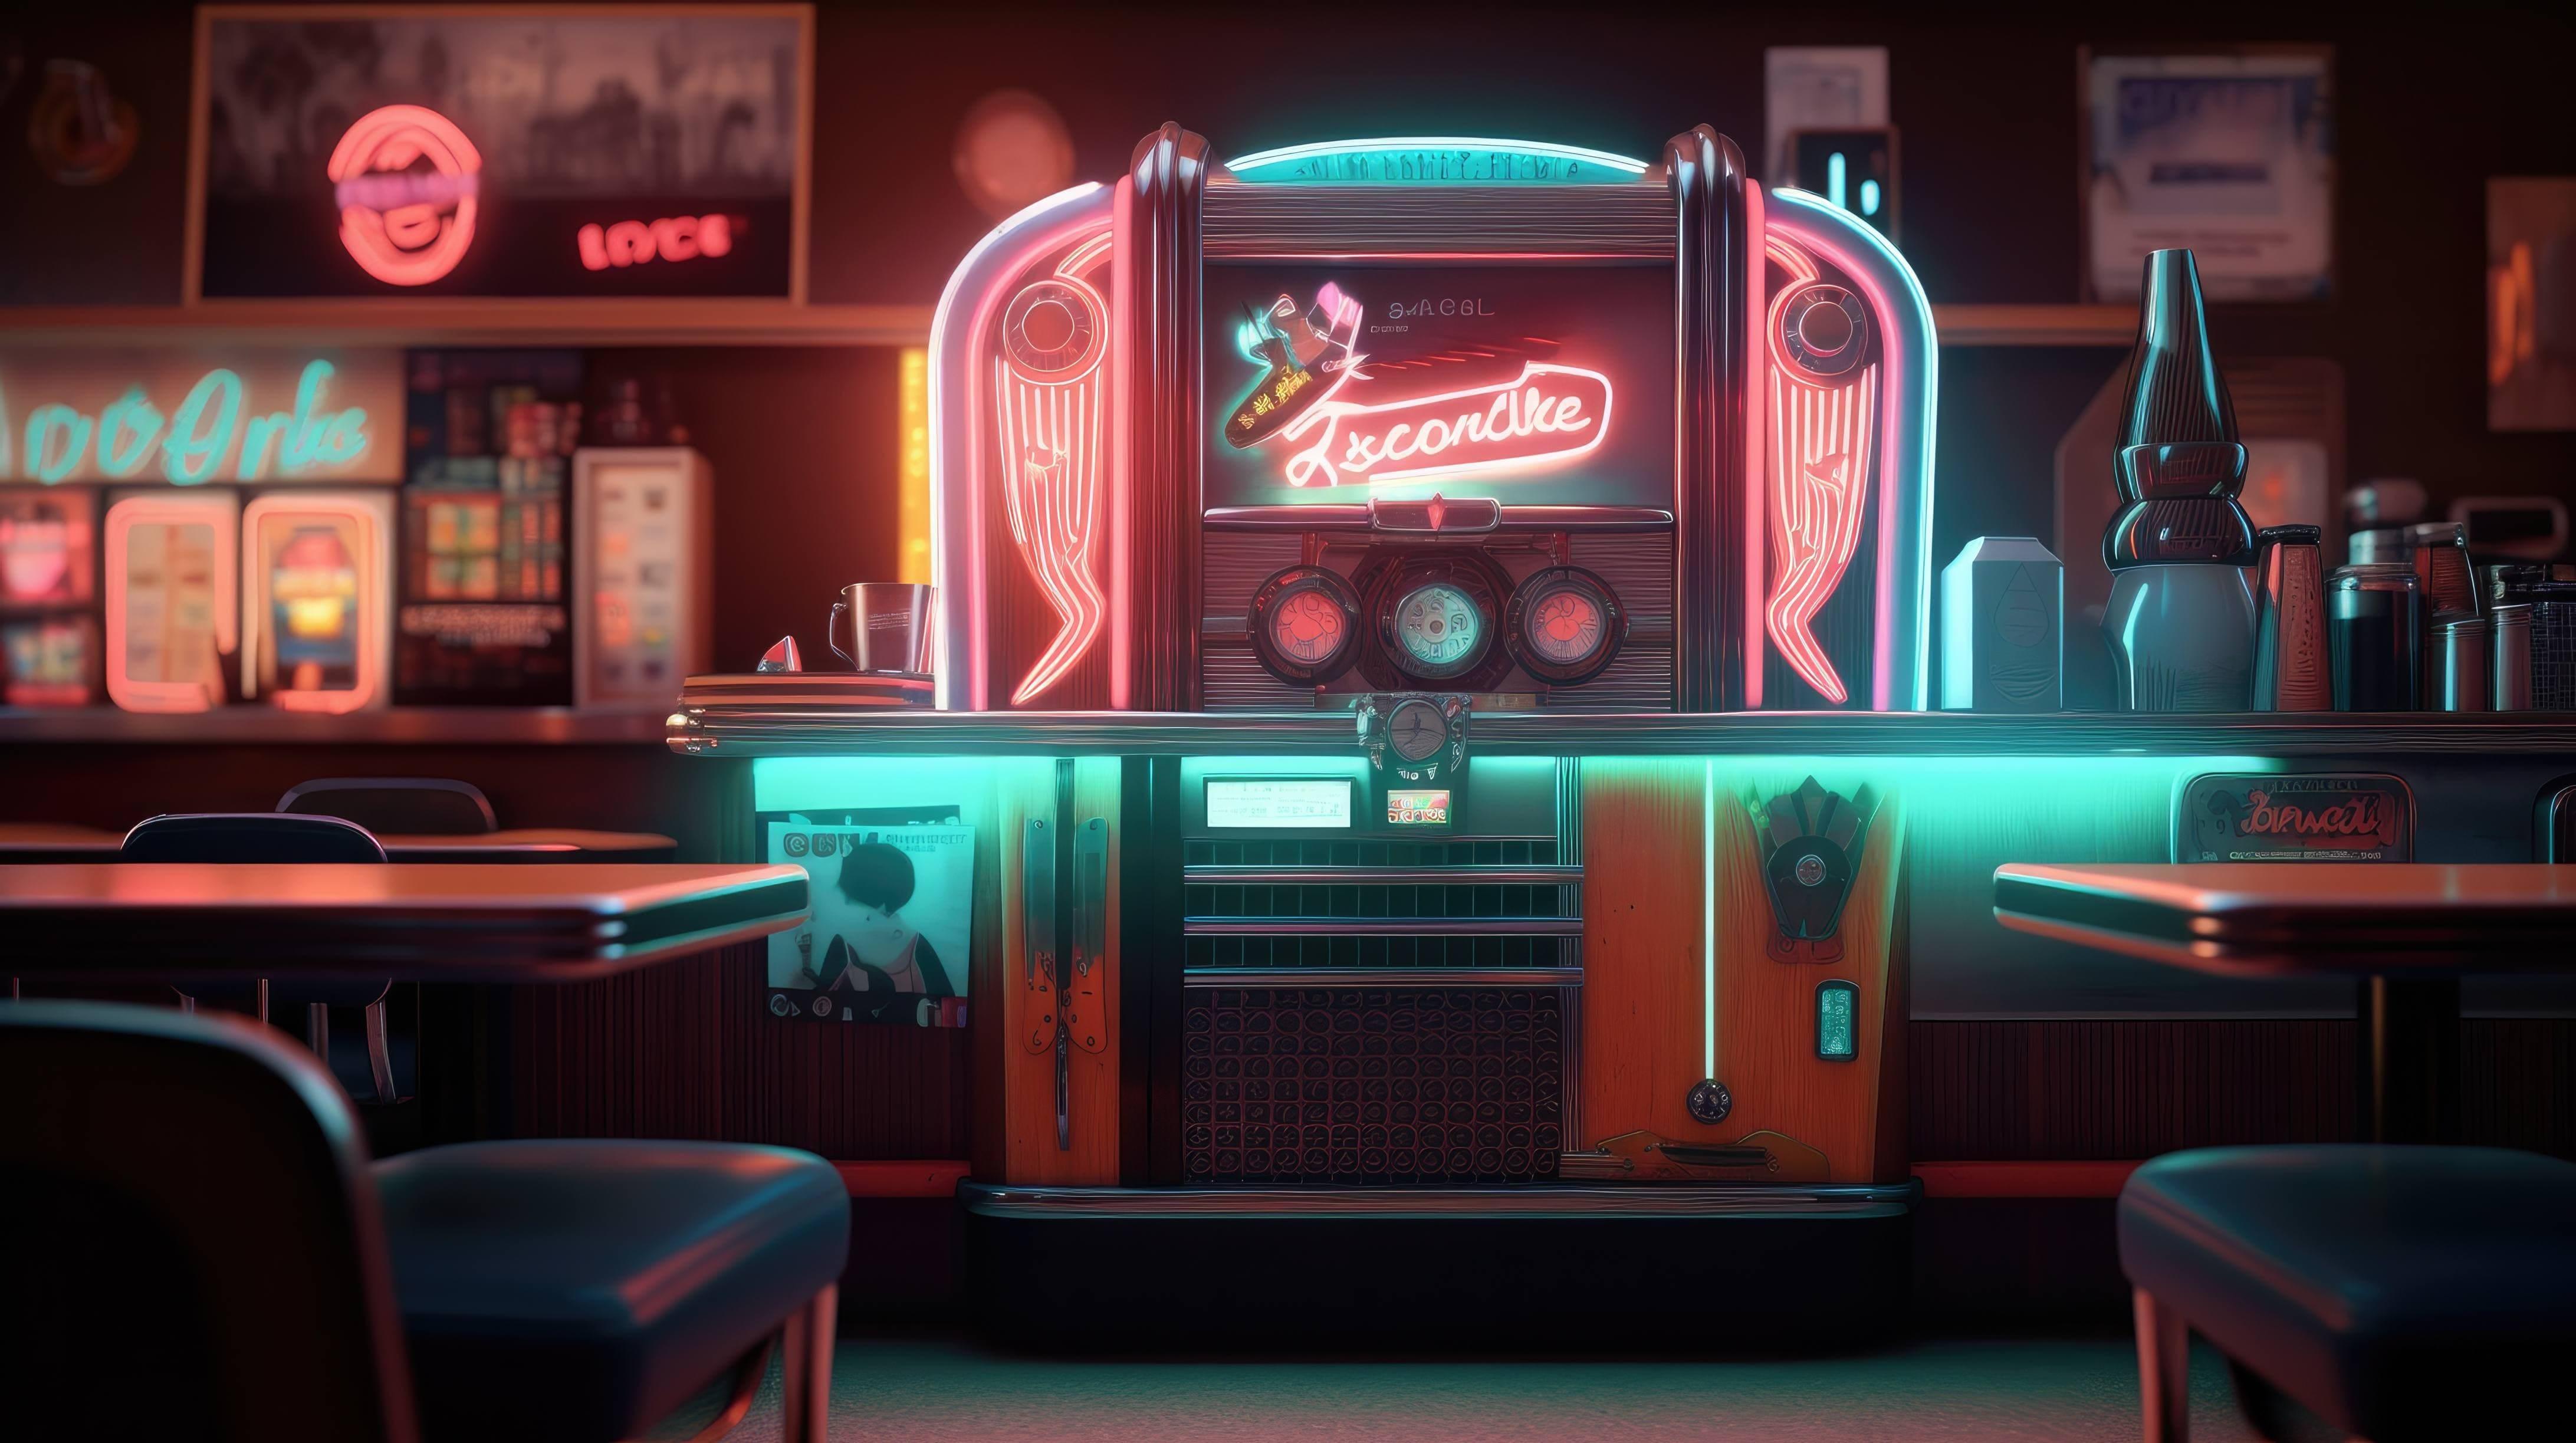 A Retro Style Desktop Wallpaper Featuring Jukebox And Neon Signs